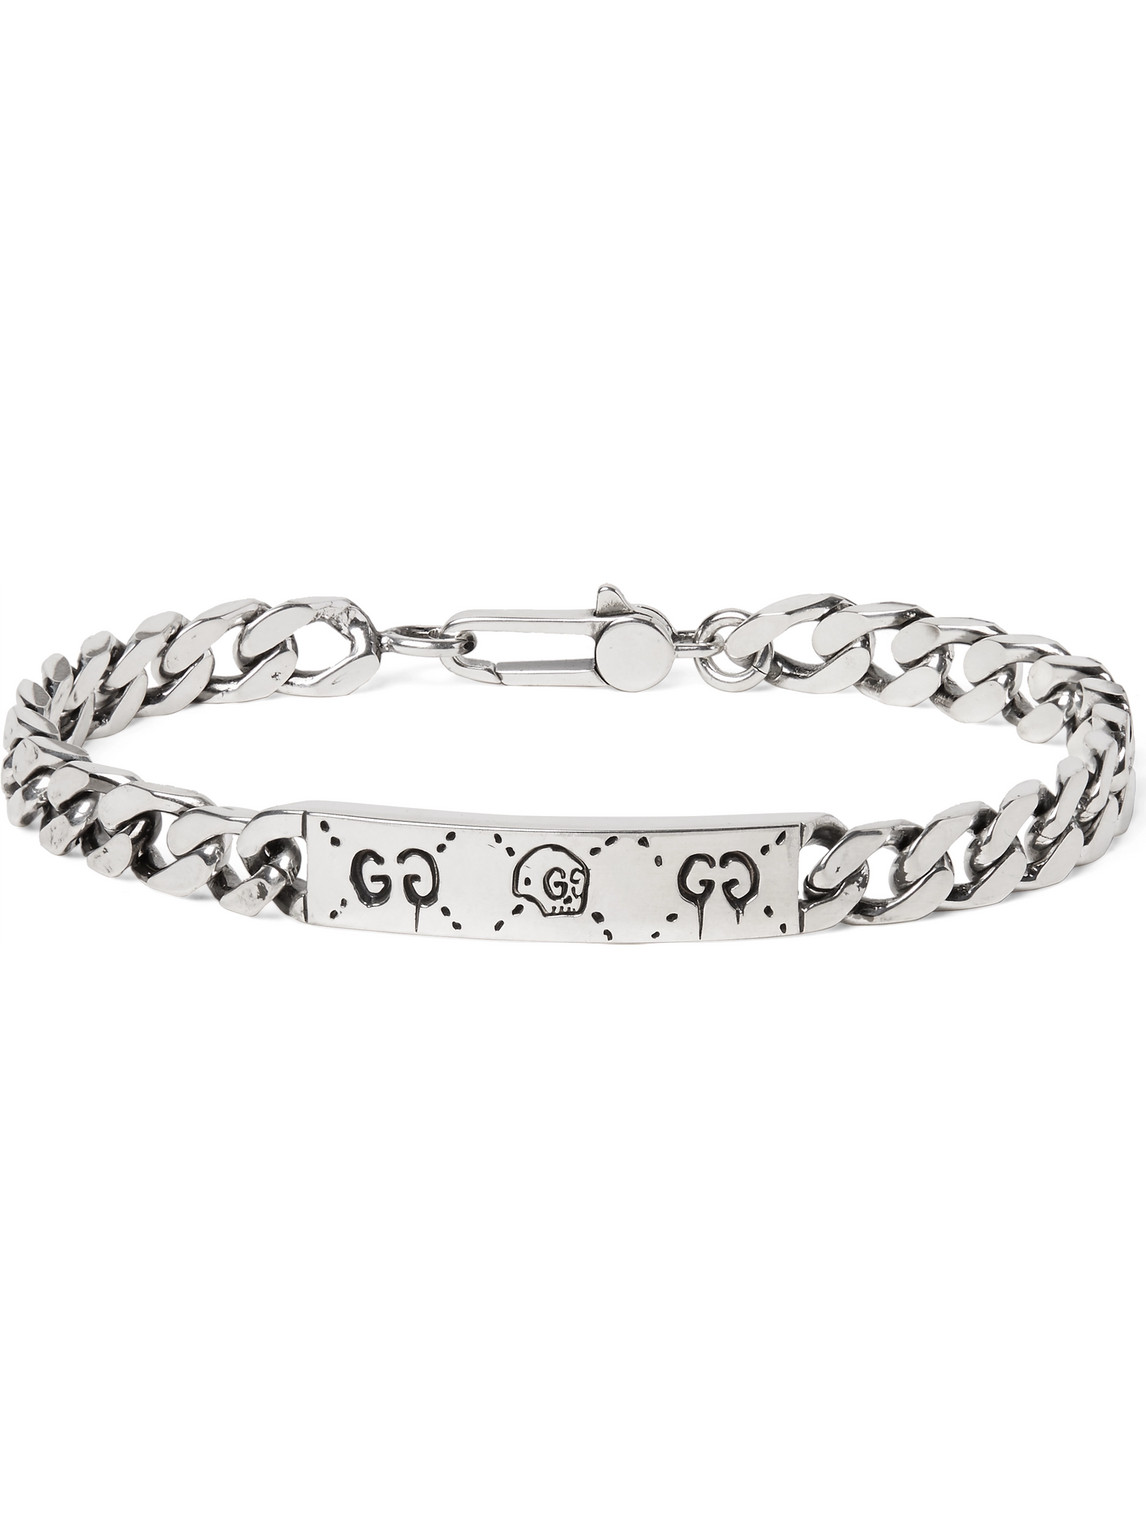 GUCCI GUCCIGHOST ENGRAVED STERLING SILVER ID BRACELET